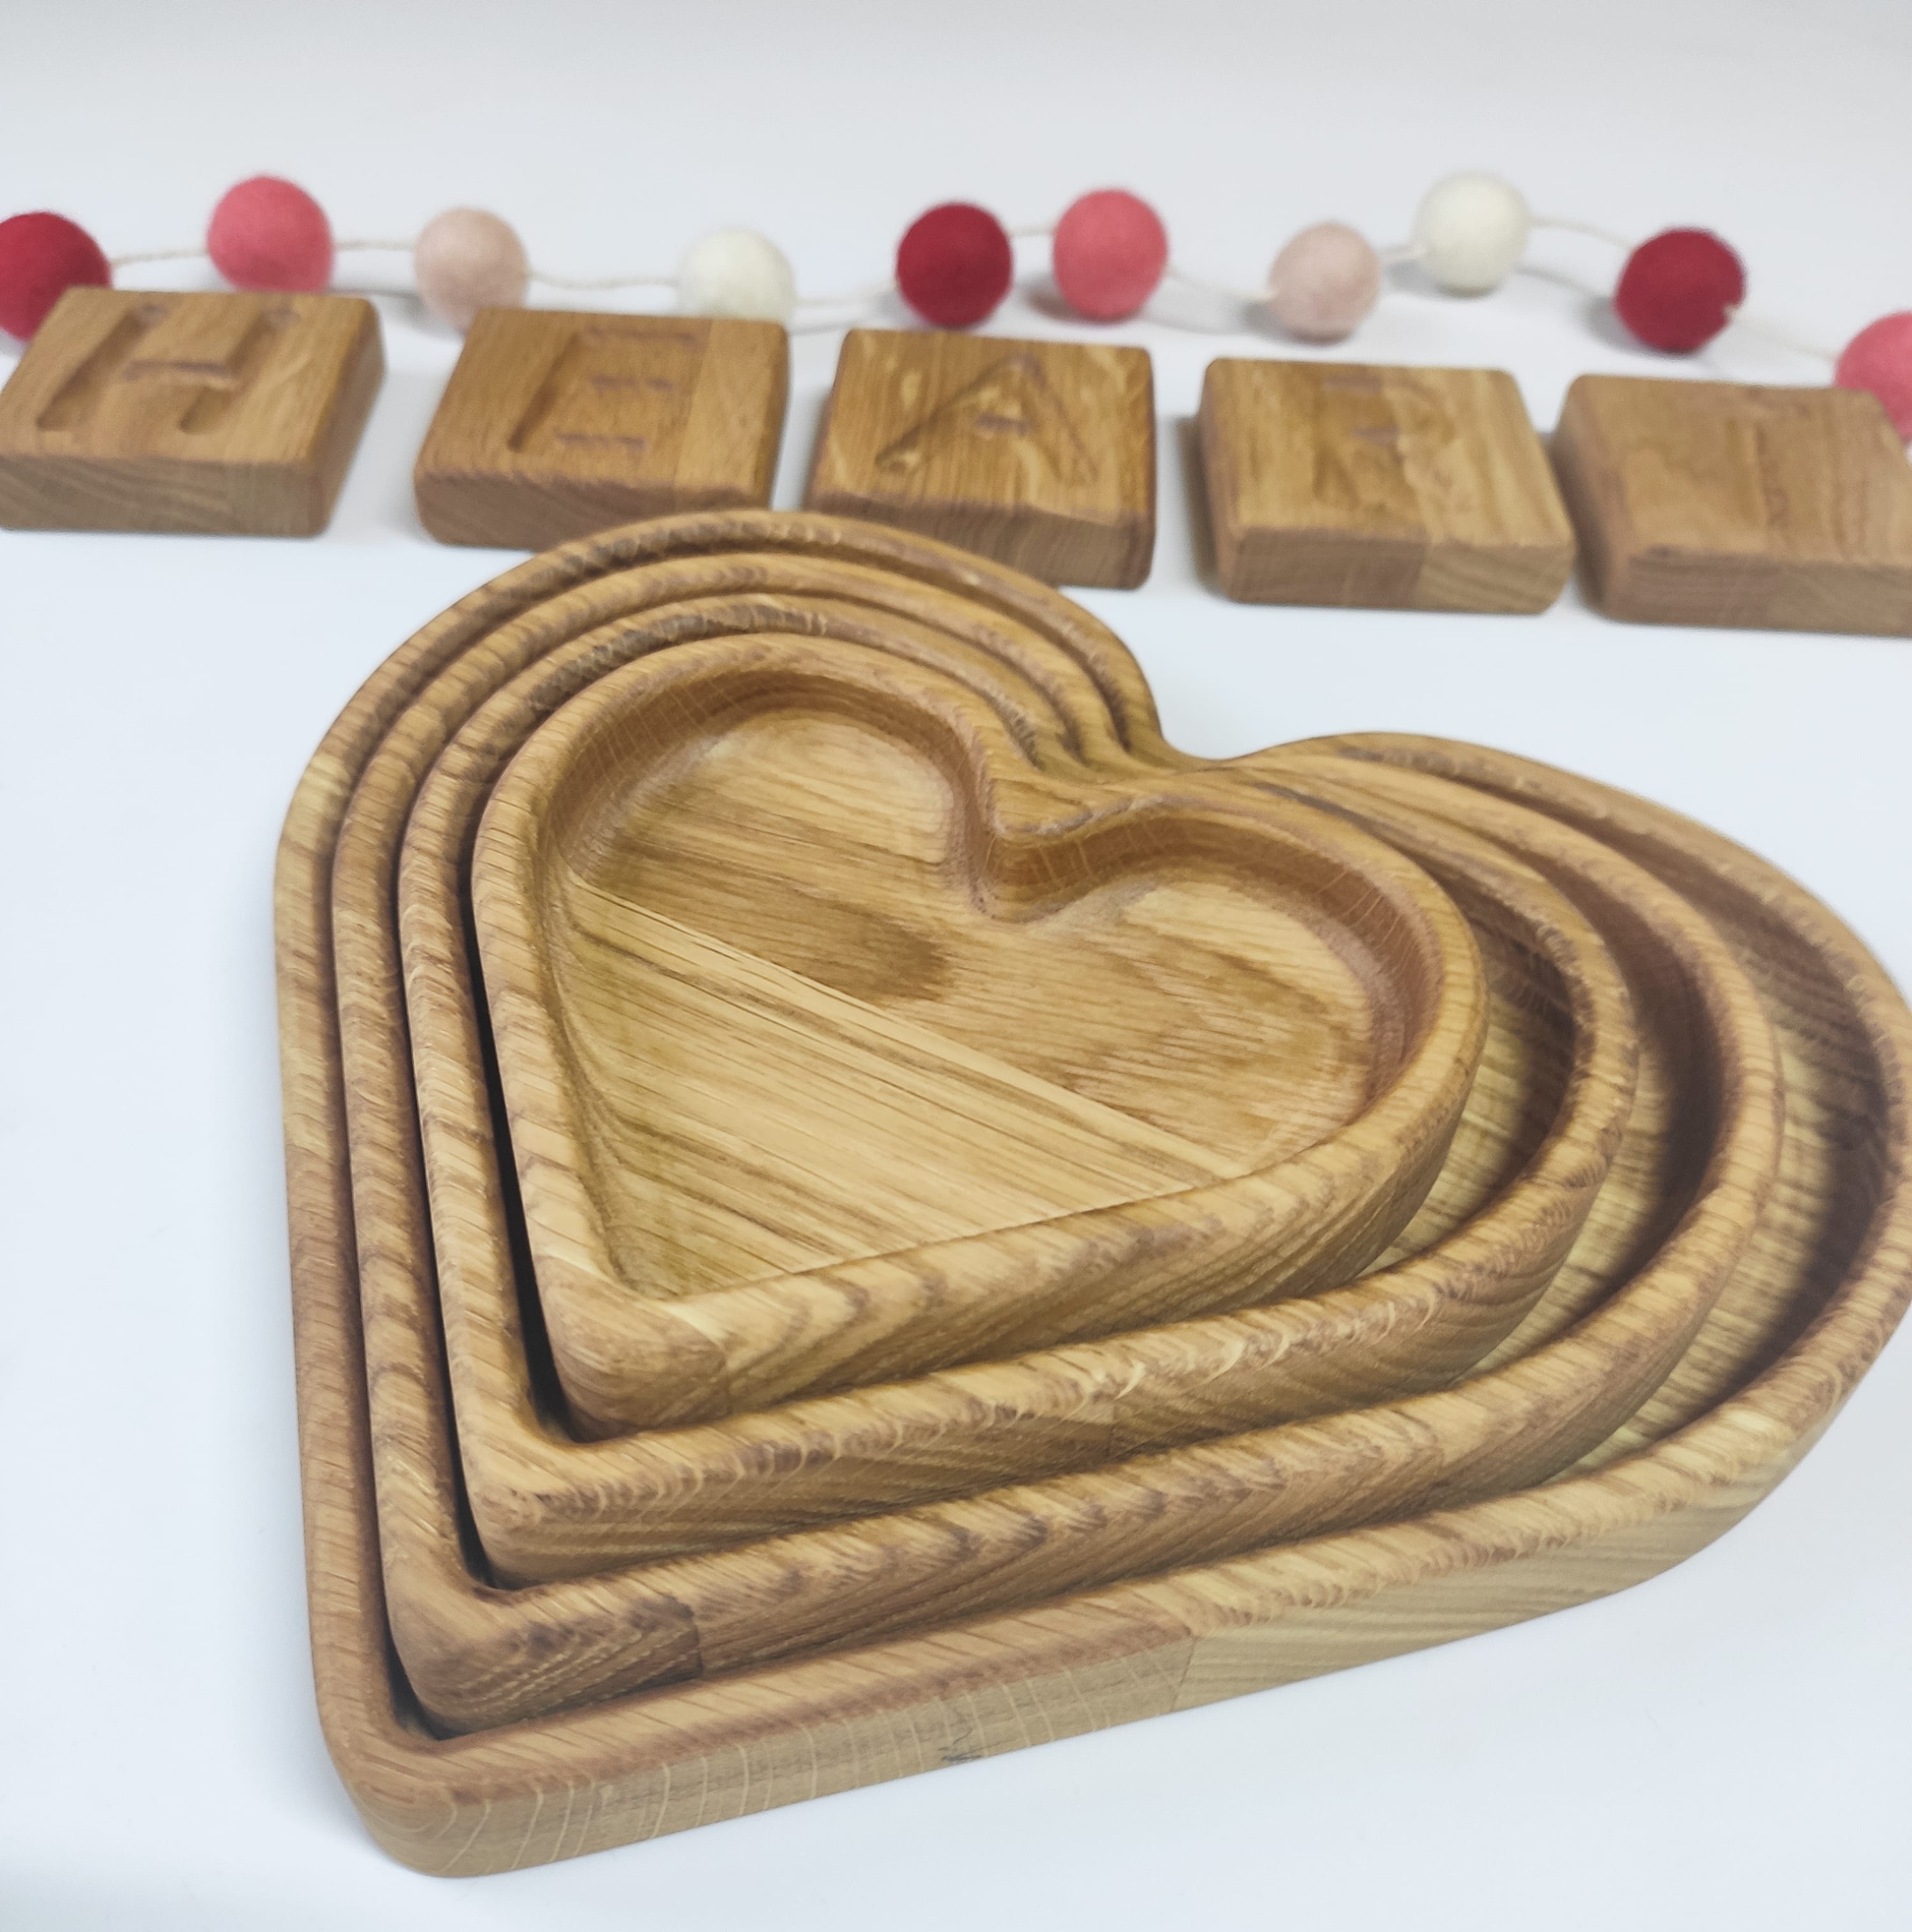 Heart shaped trays, sorting trays, jewelry trays, serving trays, oak plate, Valentine's Day gifts